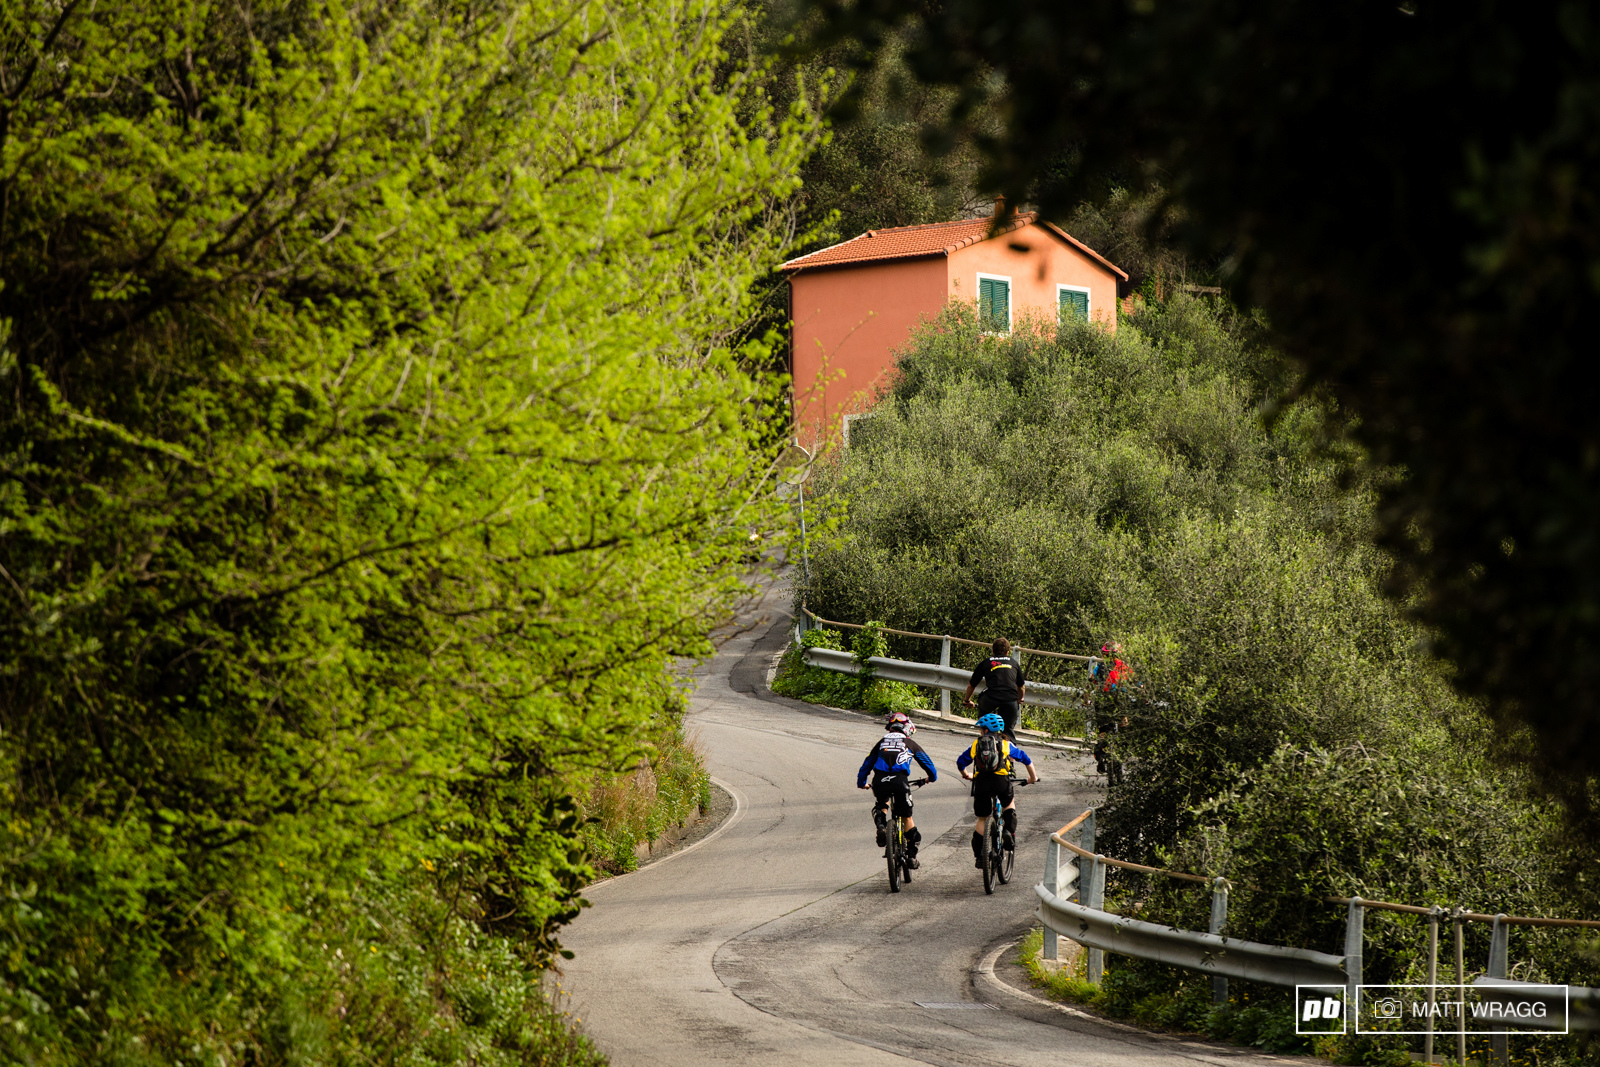 The climb up to the stages today took riders up the winding road of San Bernardo (no, not the famous alpine pass). Cut down from four to three stages this year, the loop was still 40km today, with around 1,000m of climbing.